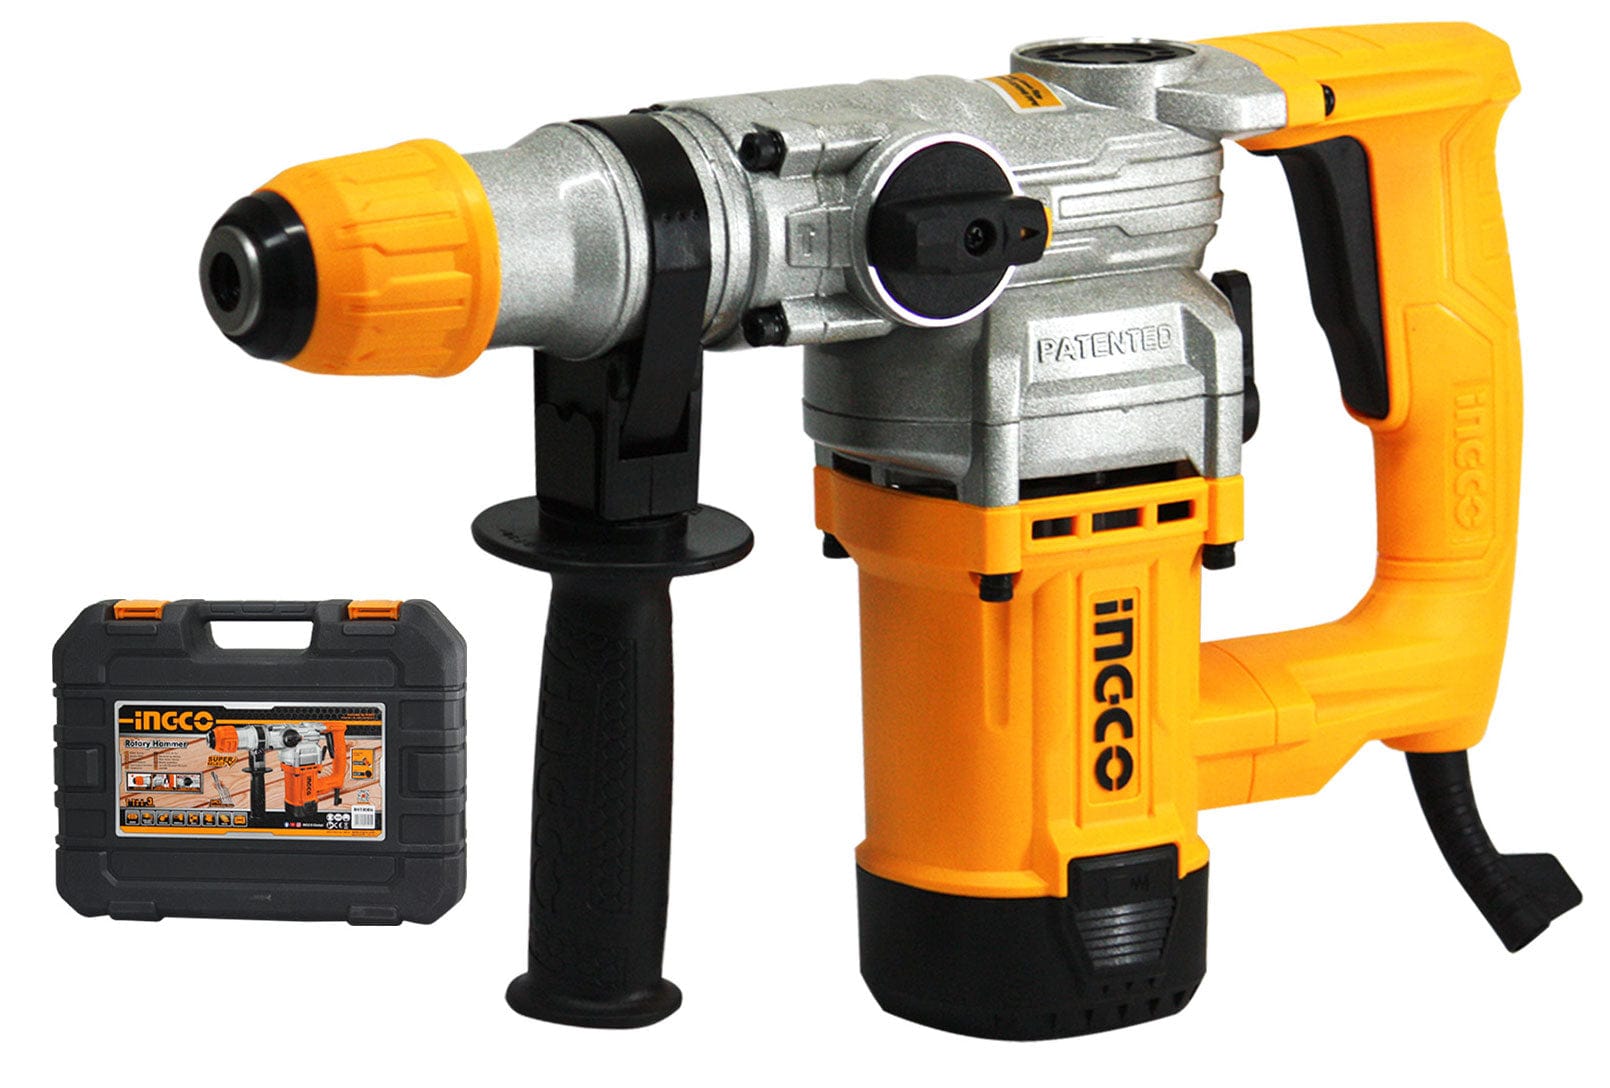 Buy Ingco Heavy Duty Rotary Hammer Drill with SDS plus 1050W - RH10506 in Ghana | Supply Master Drill Buy Tools hardware Building materials